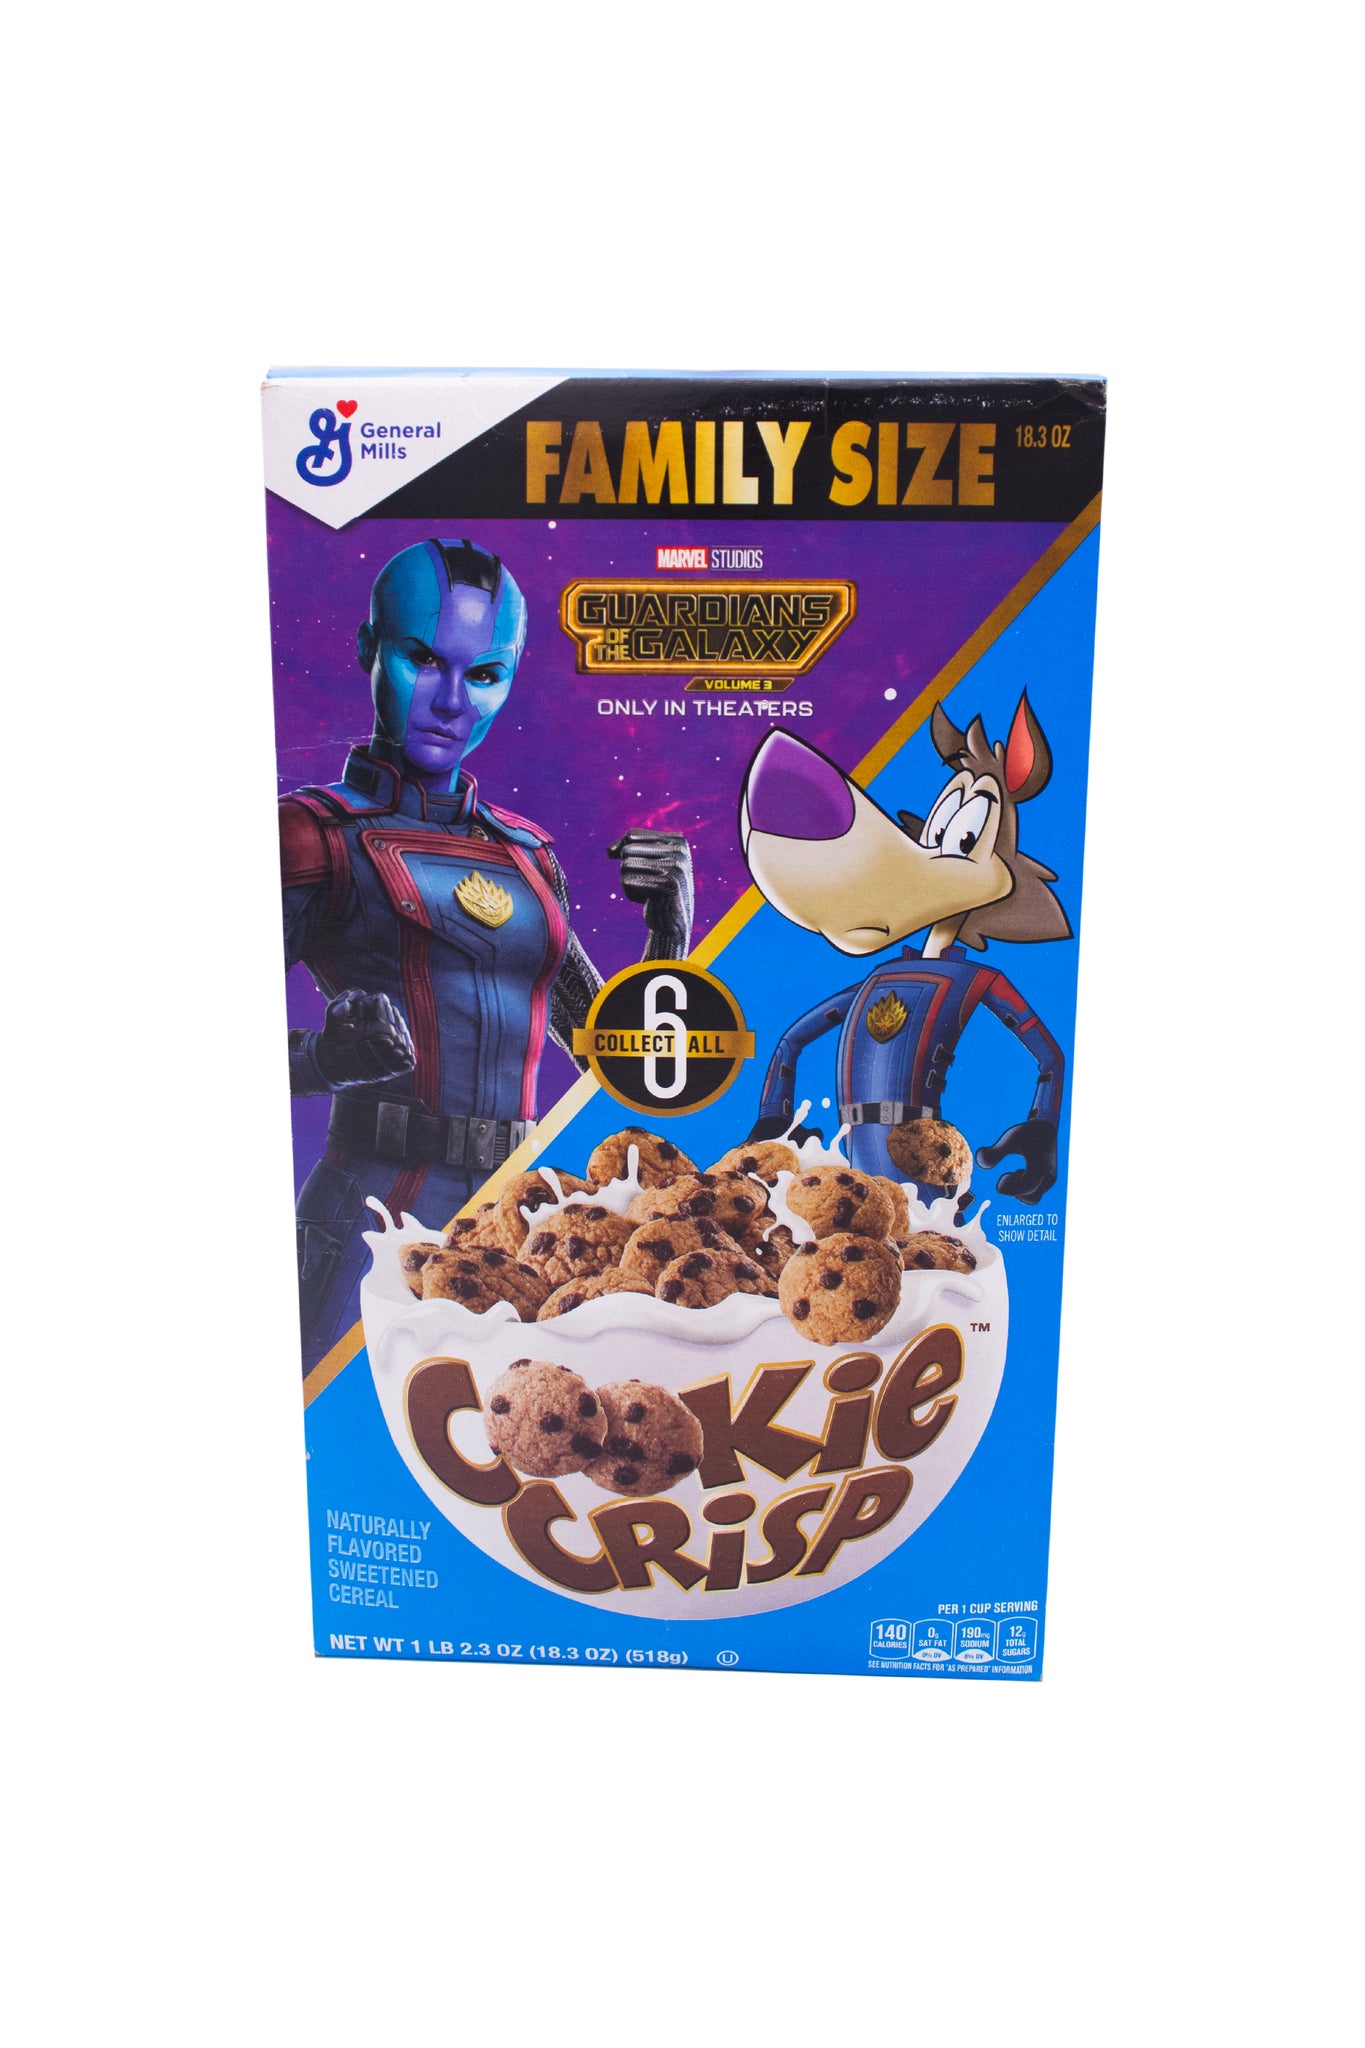 Cookie Crisp Whole Grain Cereal, Guardians of the Galaxy Vol. 3 Special Edition, Family Size, 518g